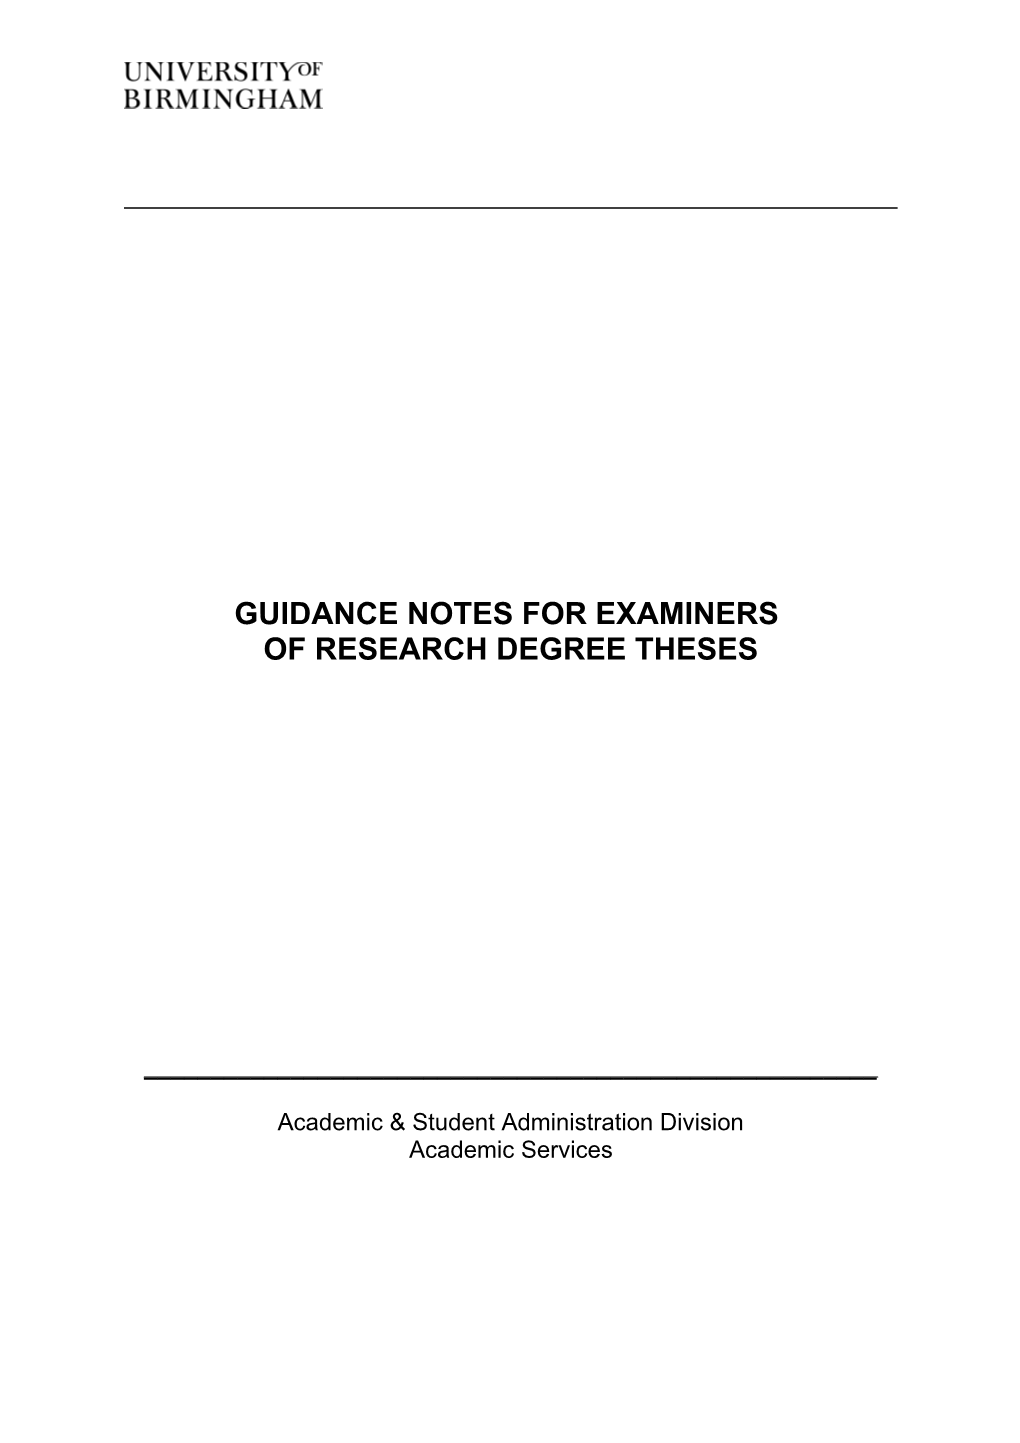 Guidance Notes for Examiners